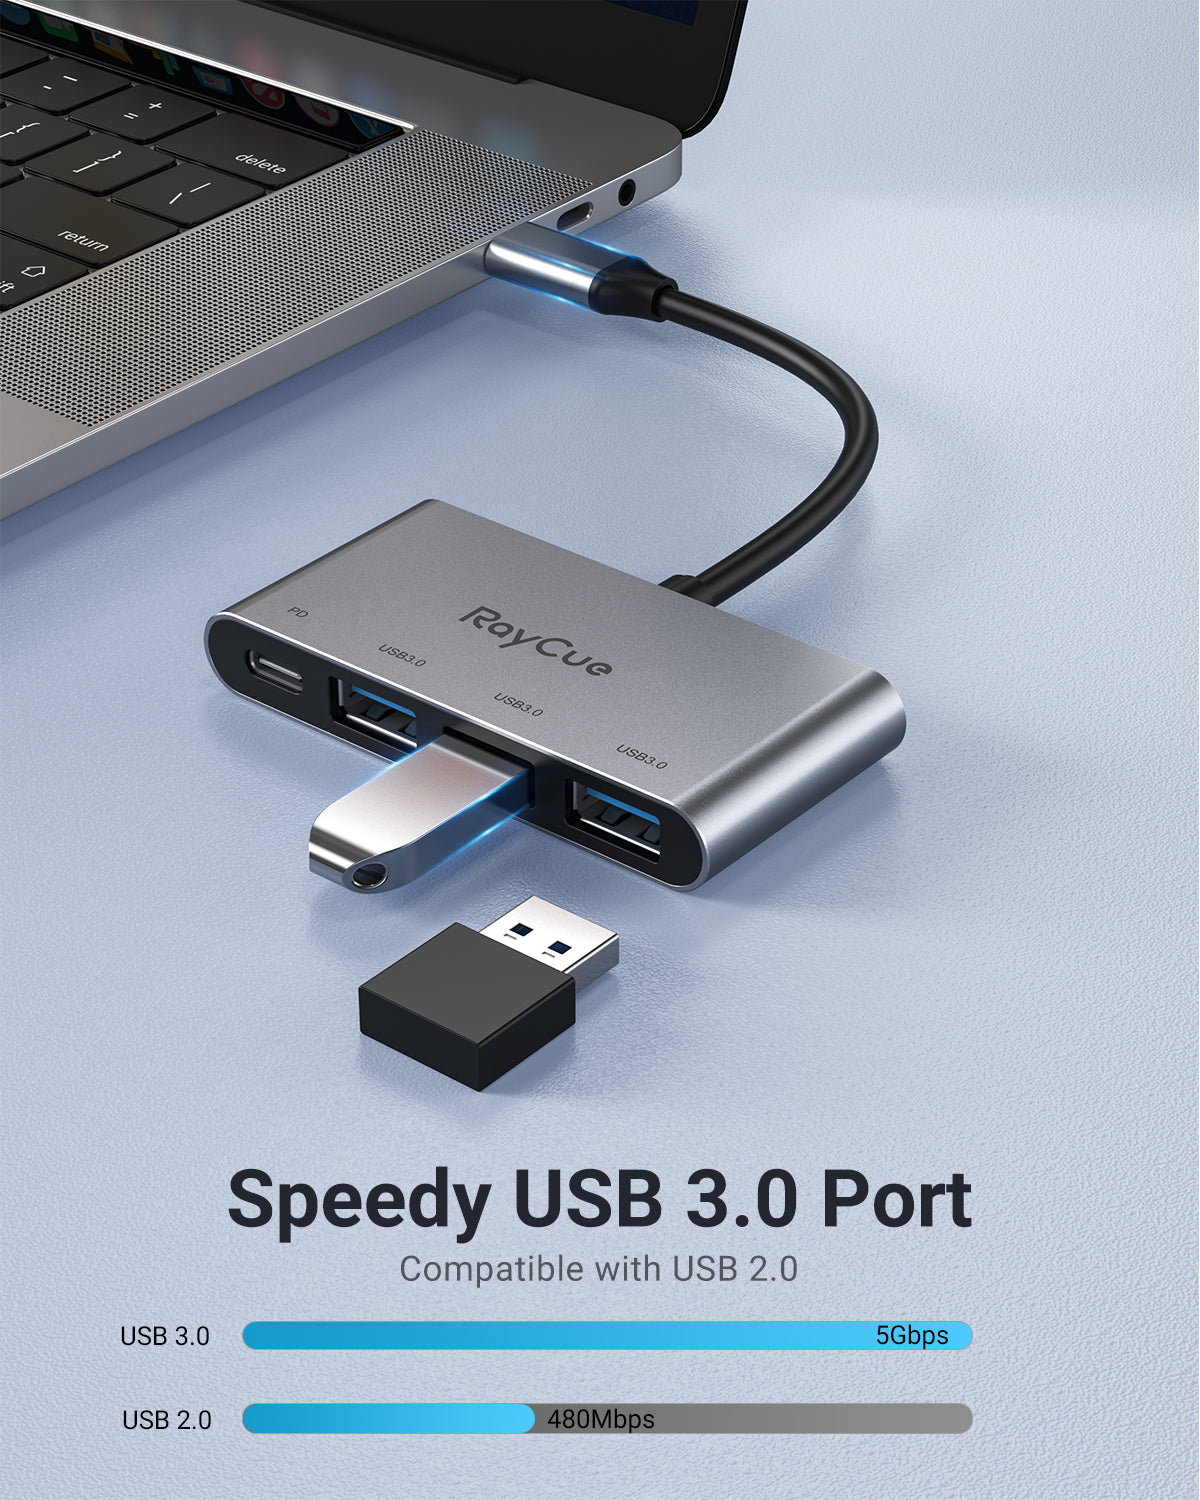 RayCue ExpandPro Ace 4-in-1 USB-C Multimedia Hub Adapter with USB 3.0&PD Port